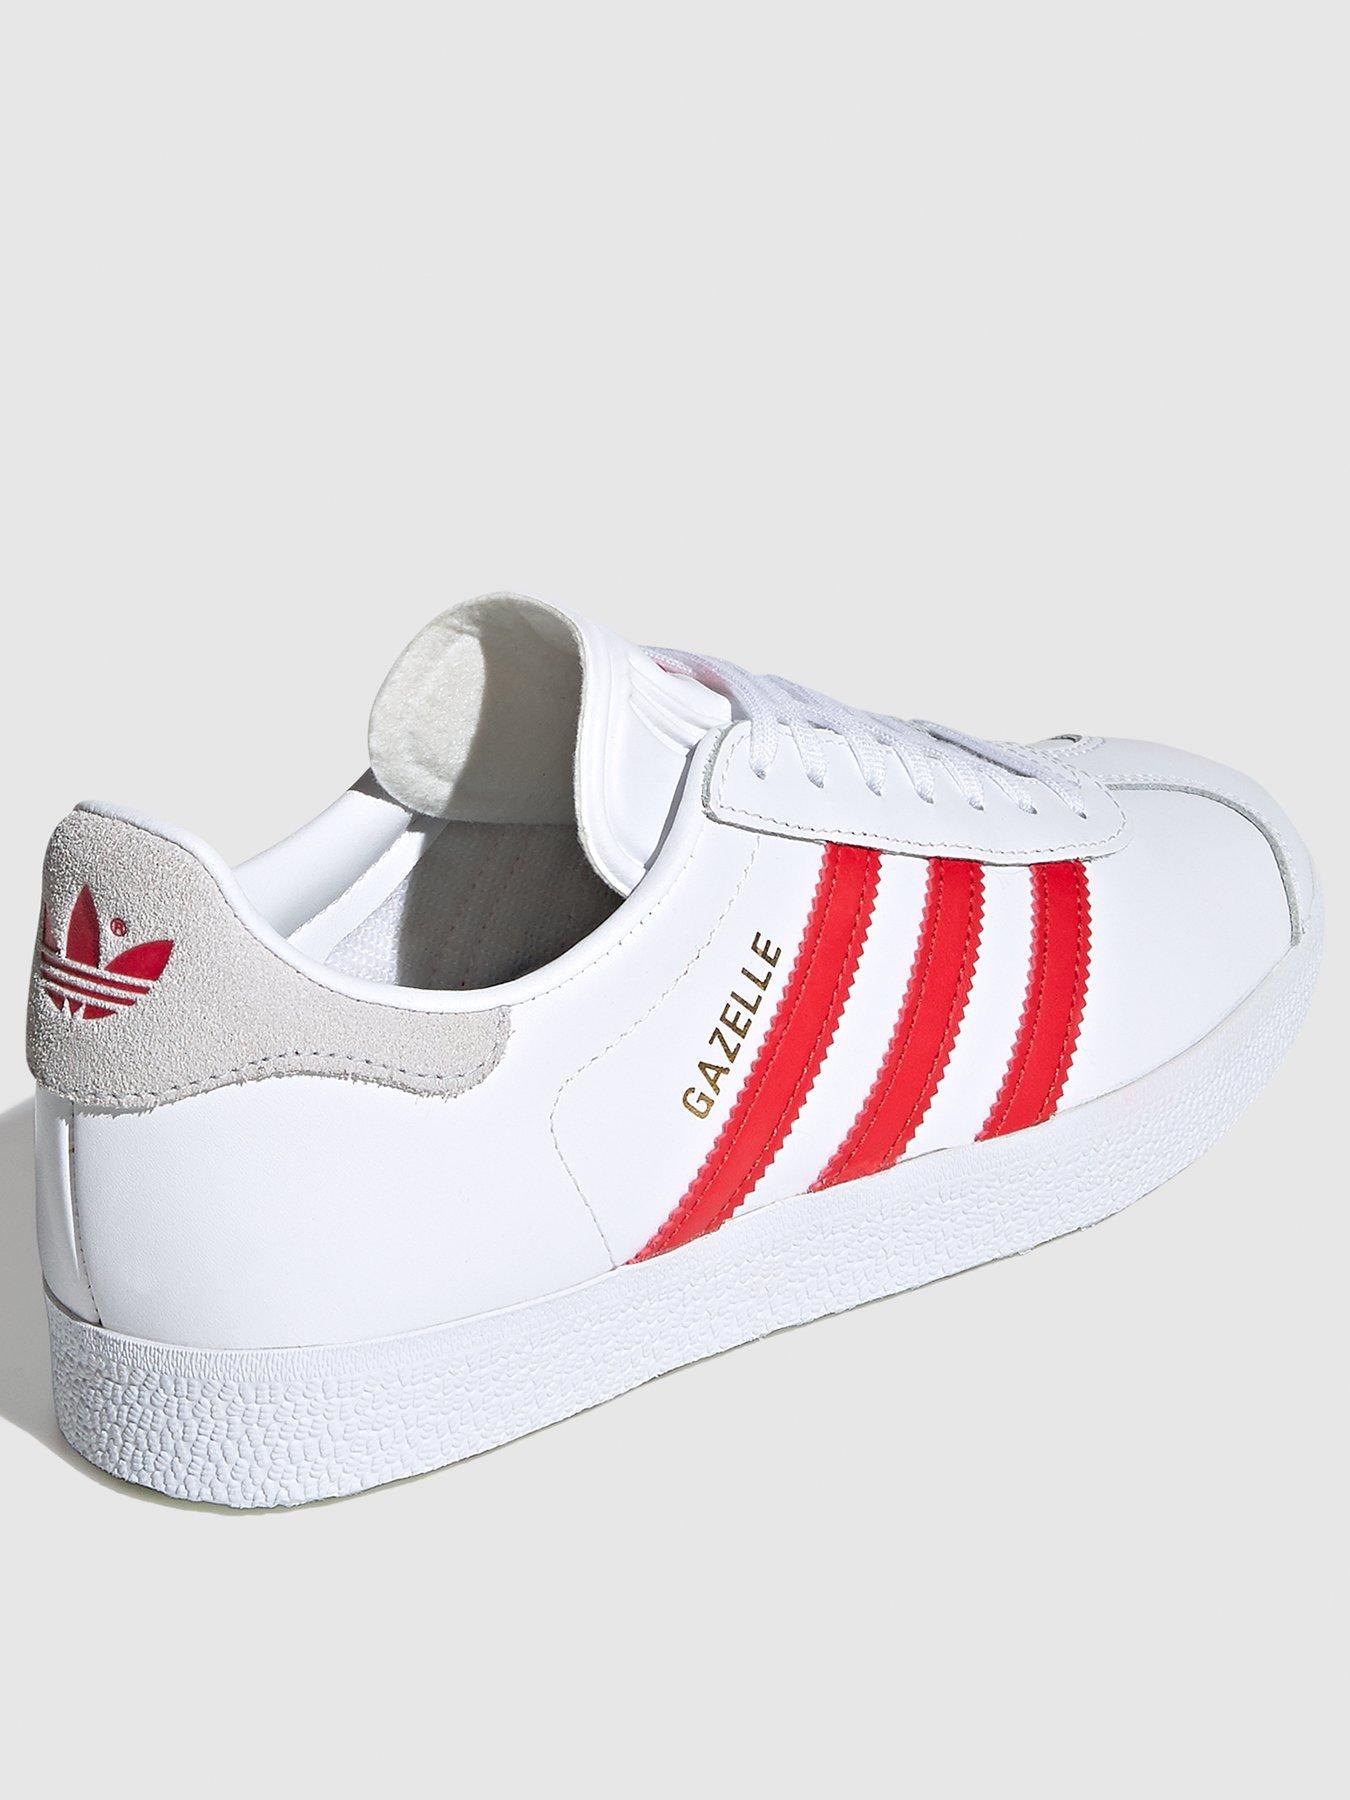 adidas gazelle white and red